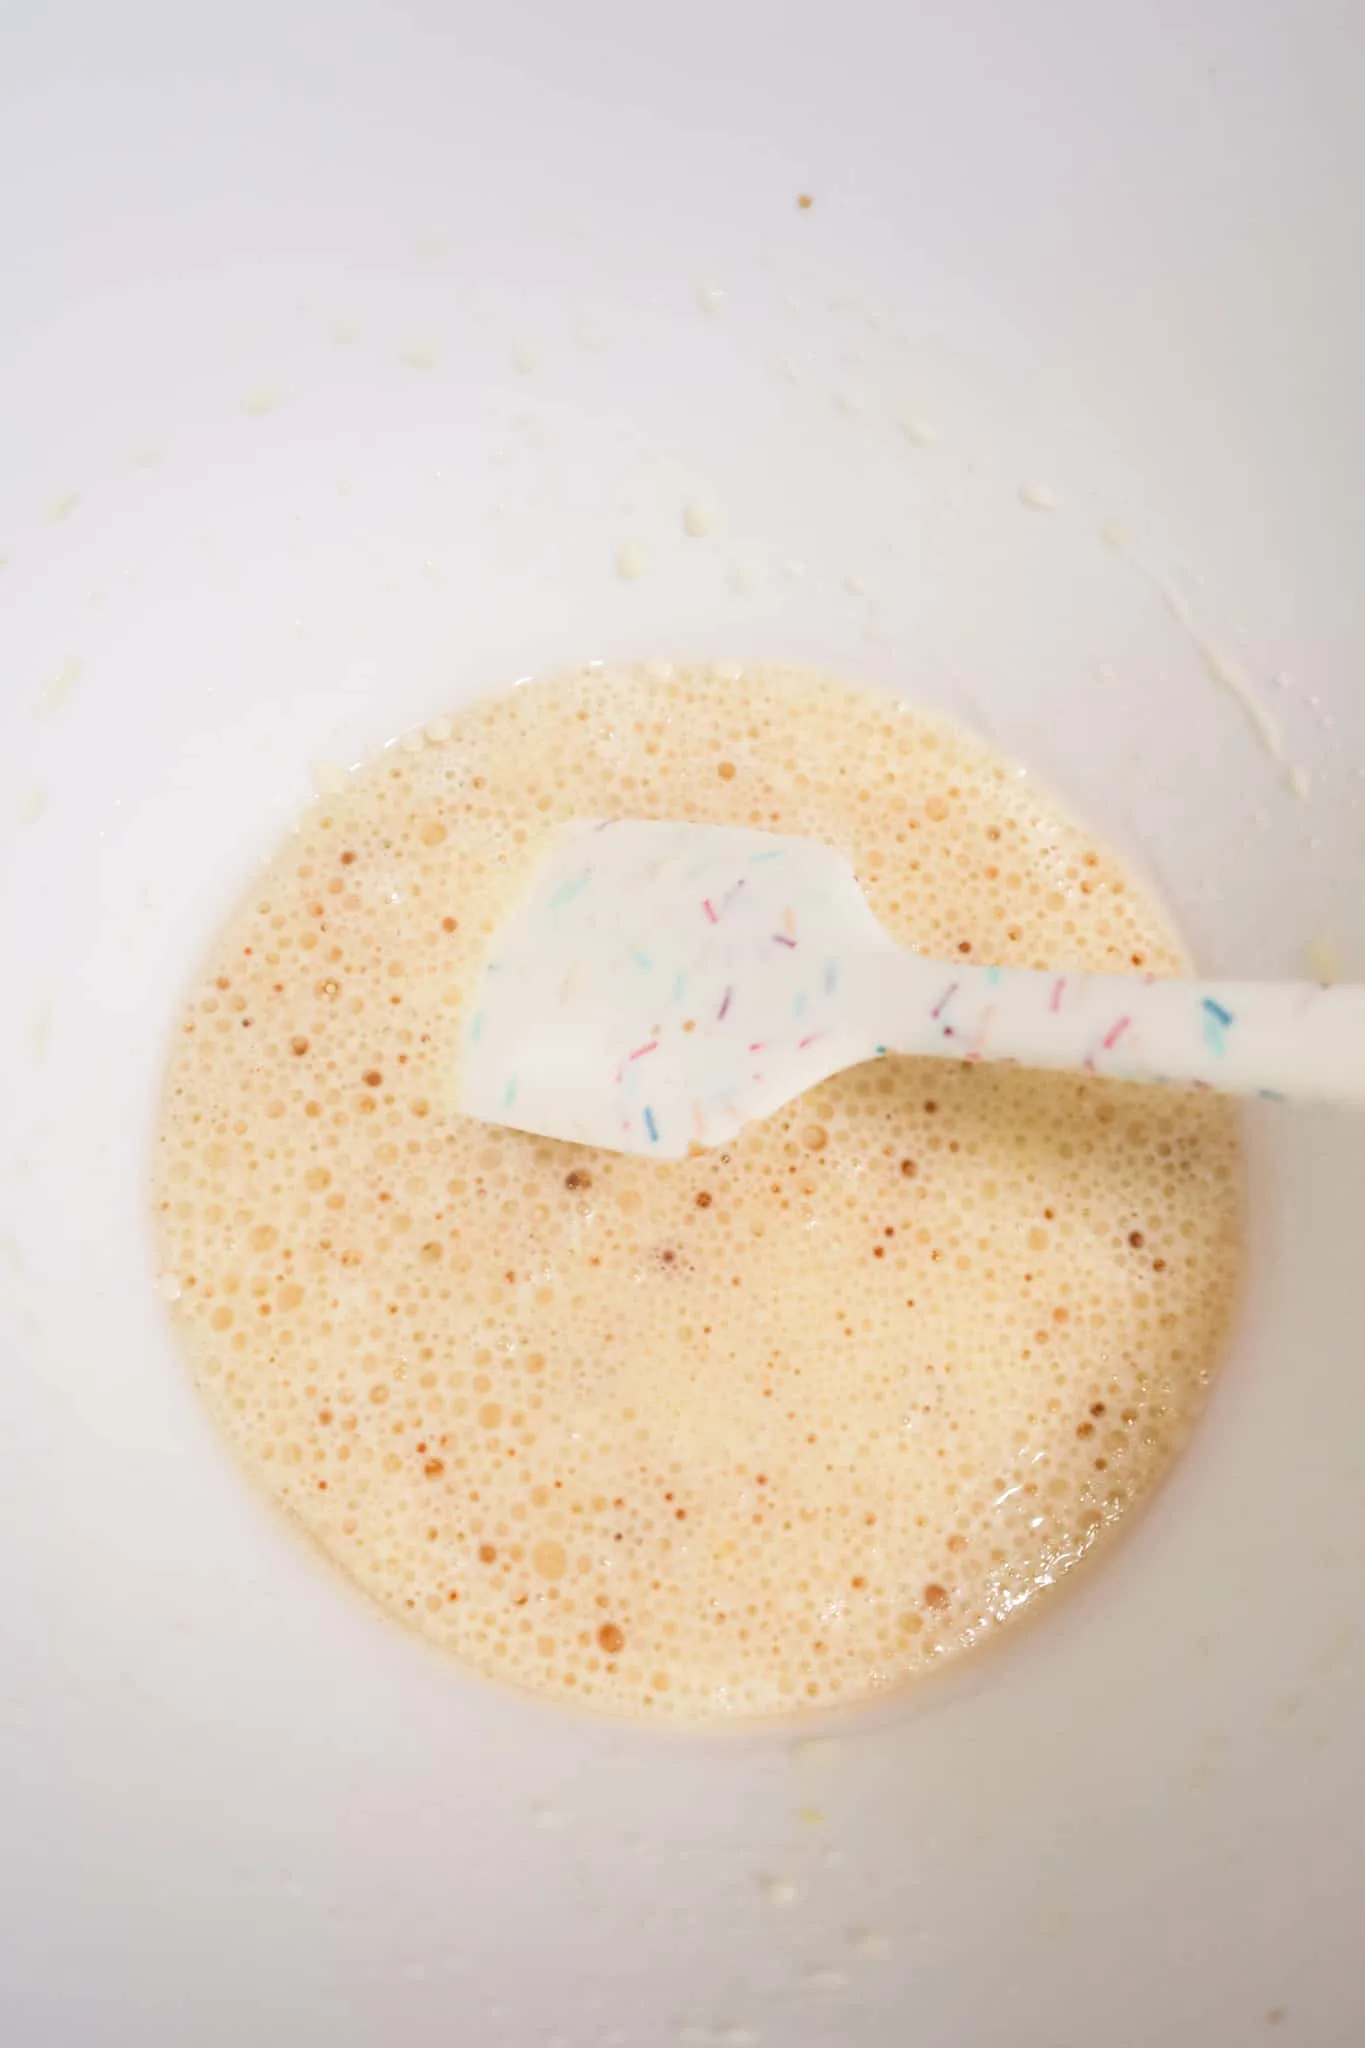 oil, vanilla, milk and egg mixture in a mixing bowl